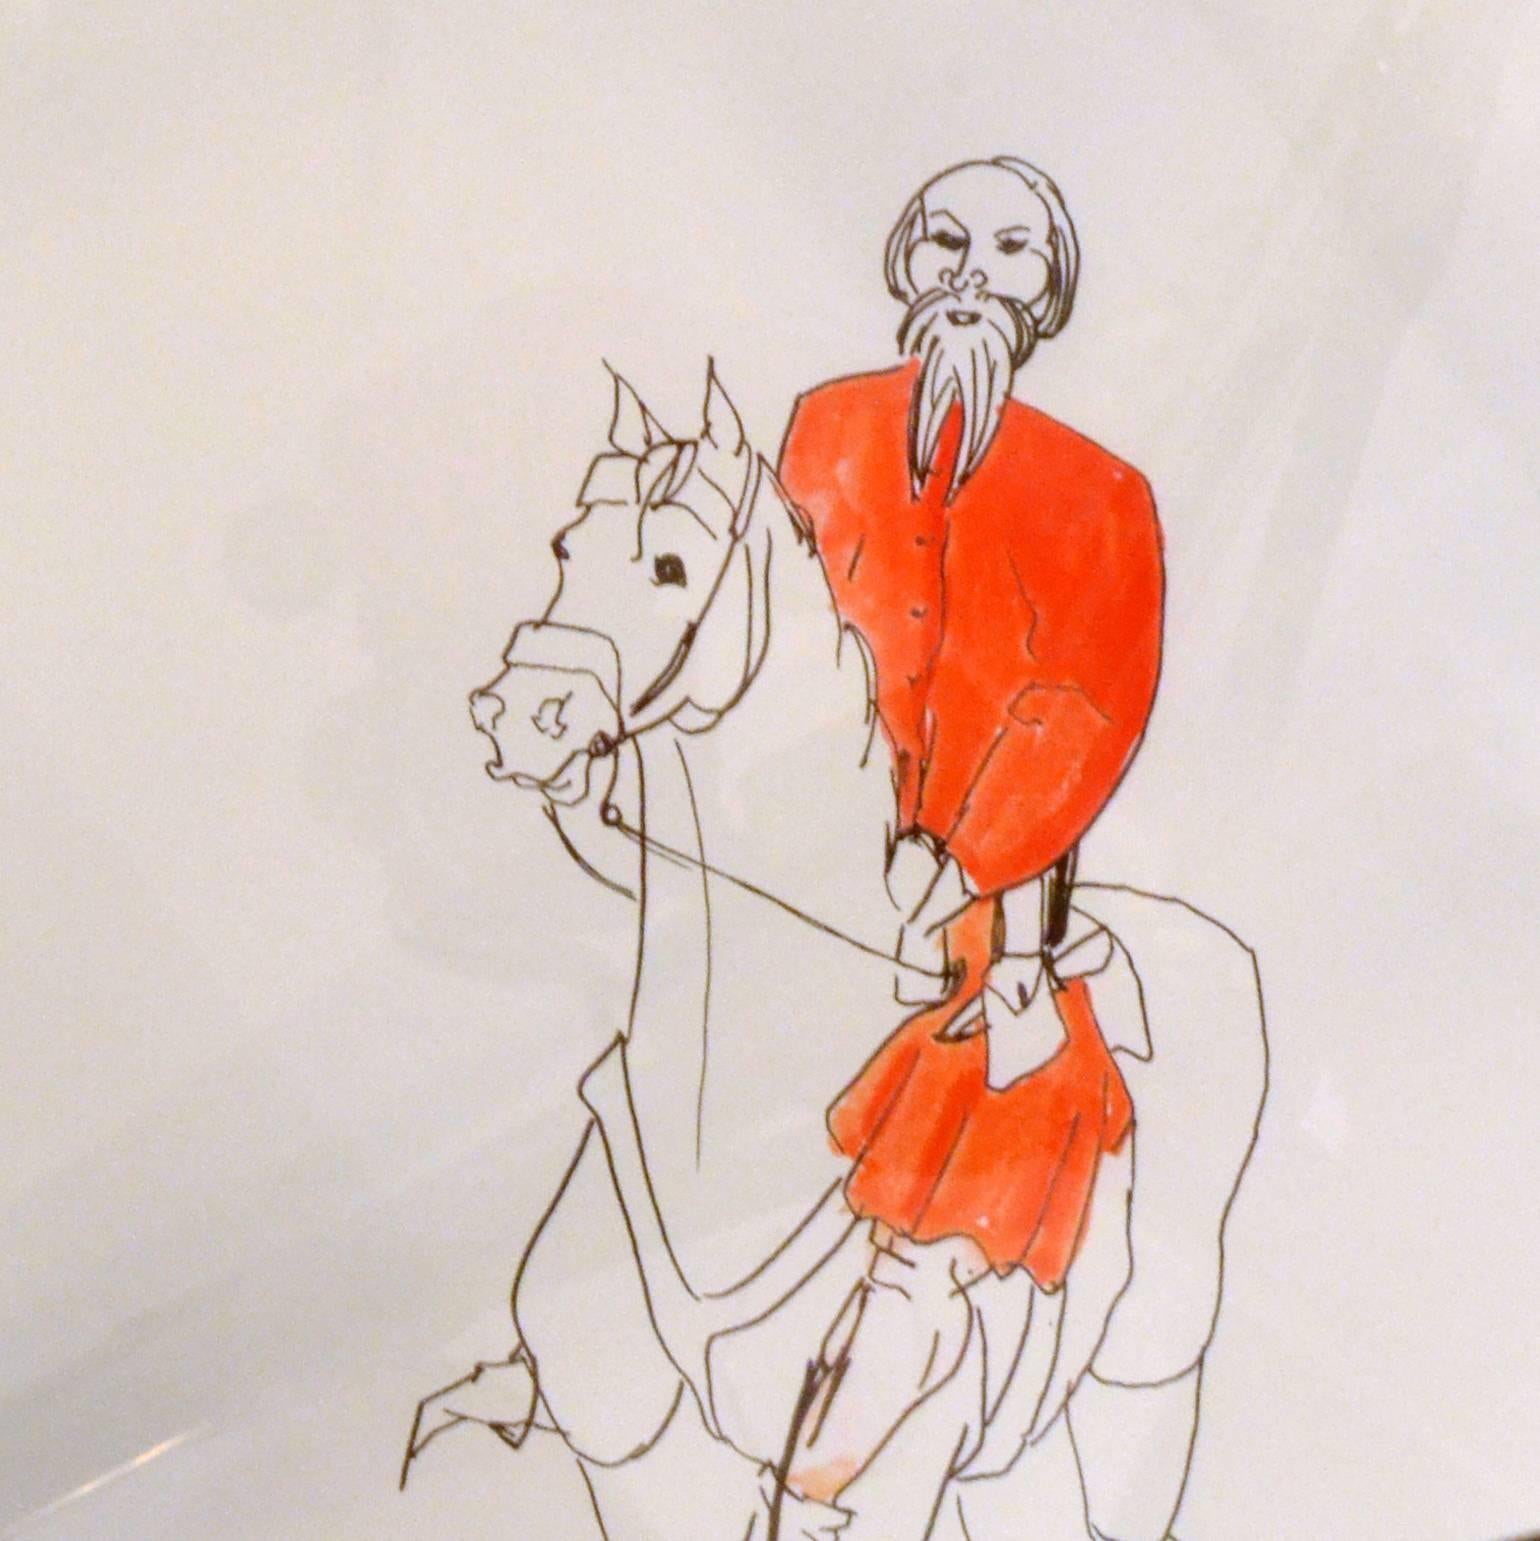 Paper Four Gothic Drawings of Medieval Men on Horseback from the 'Canterbury tales'